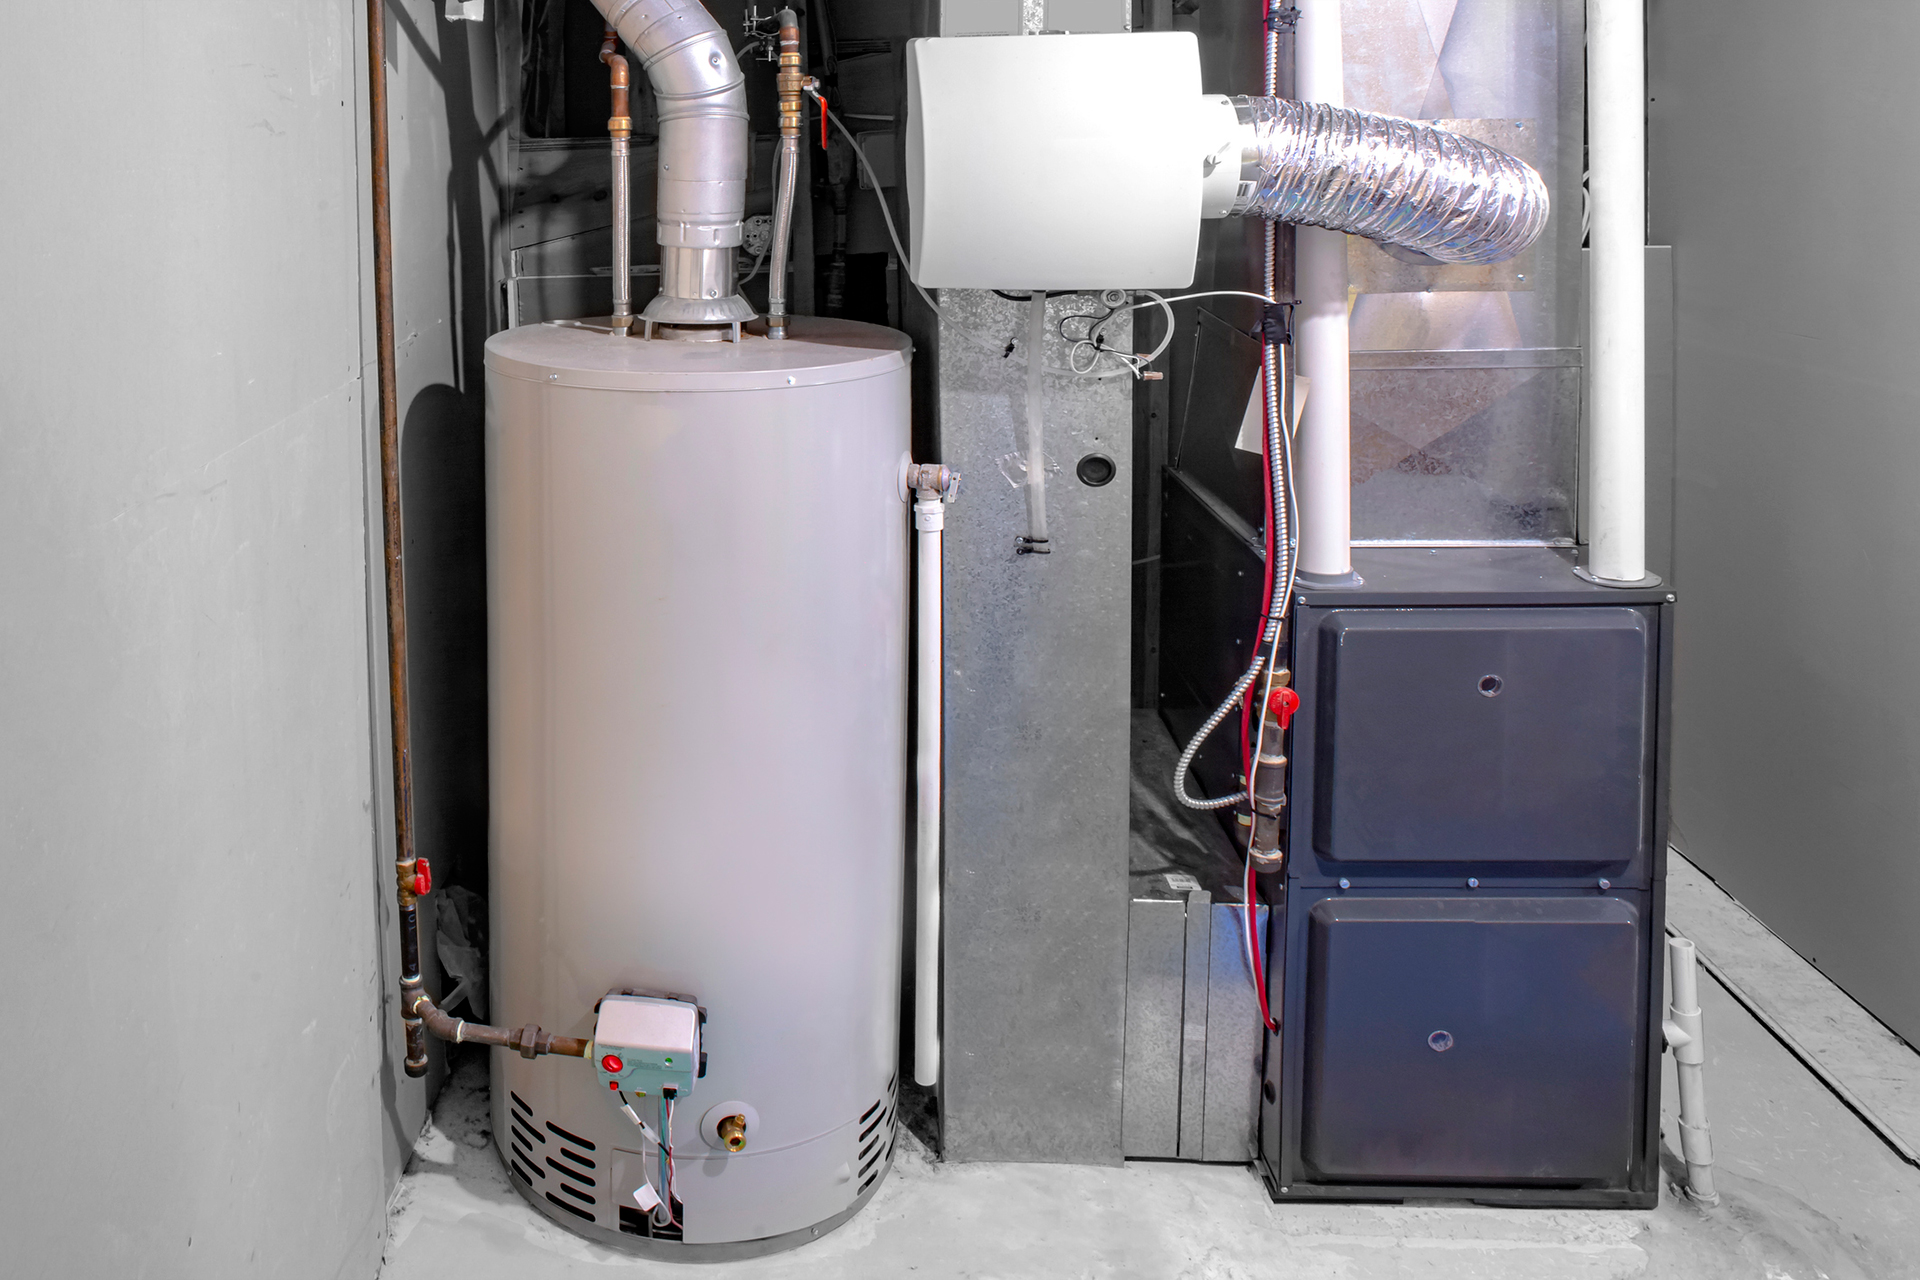 Water Heater in Utility Room